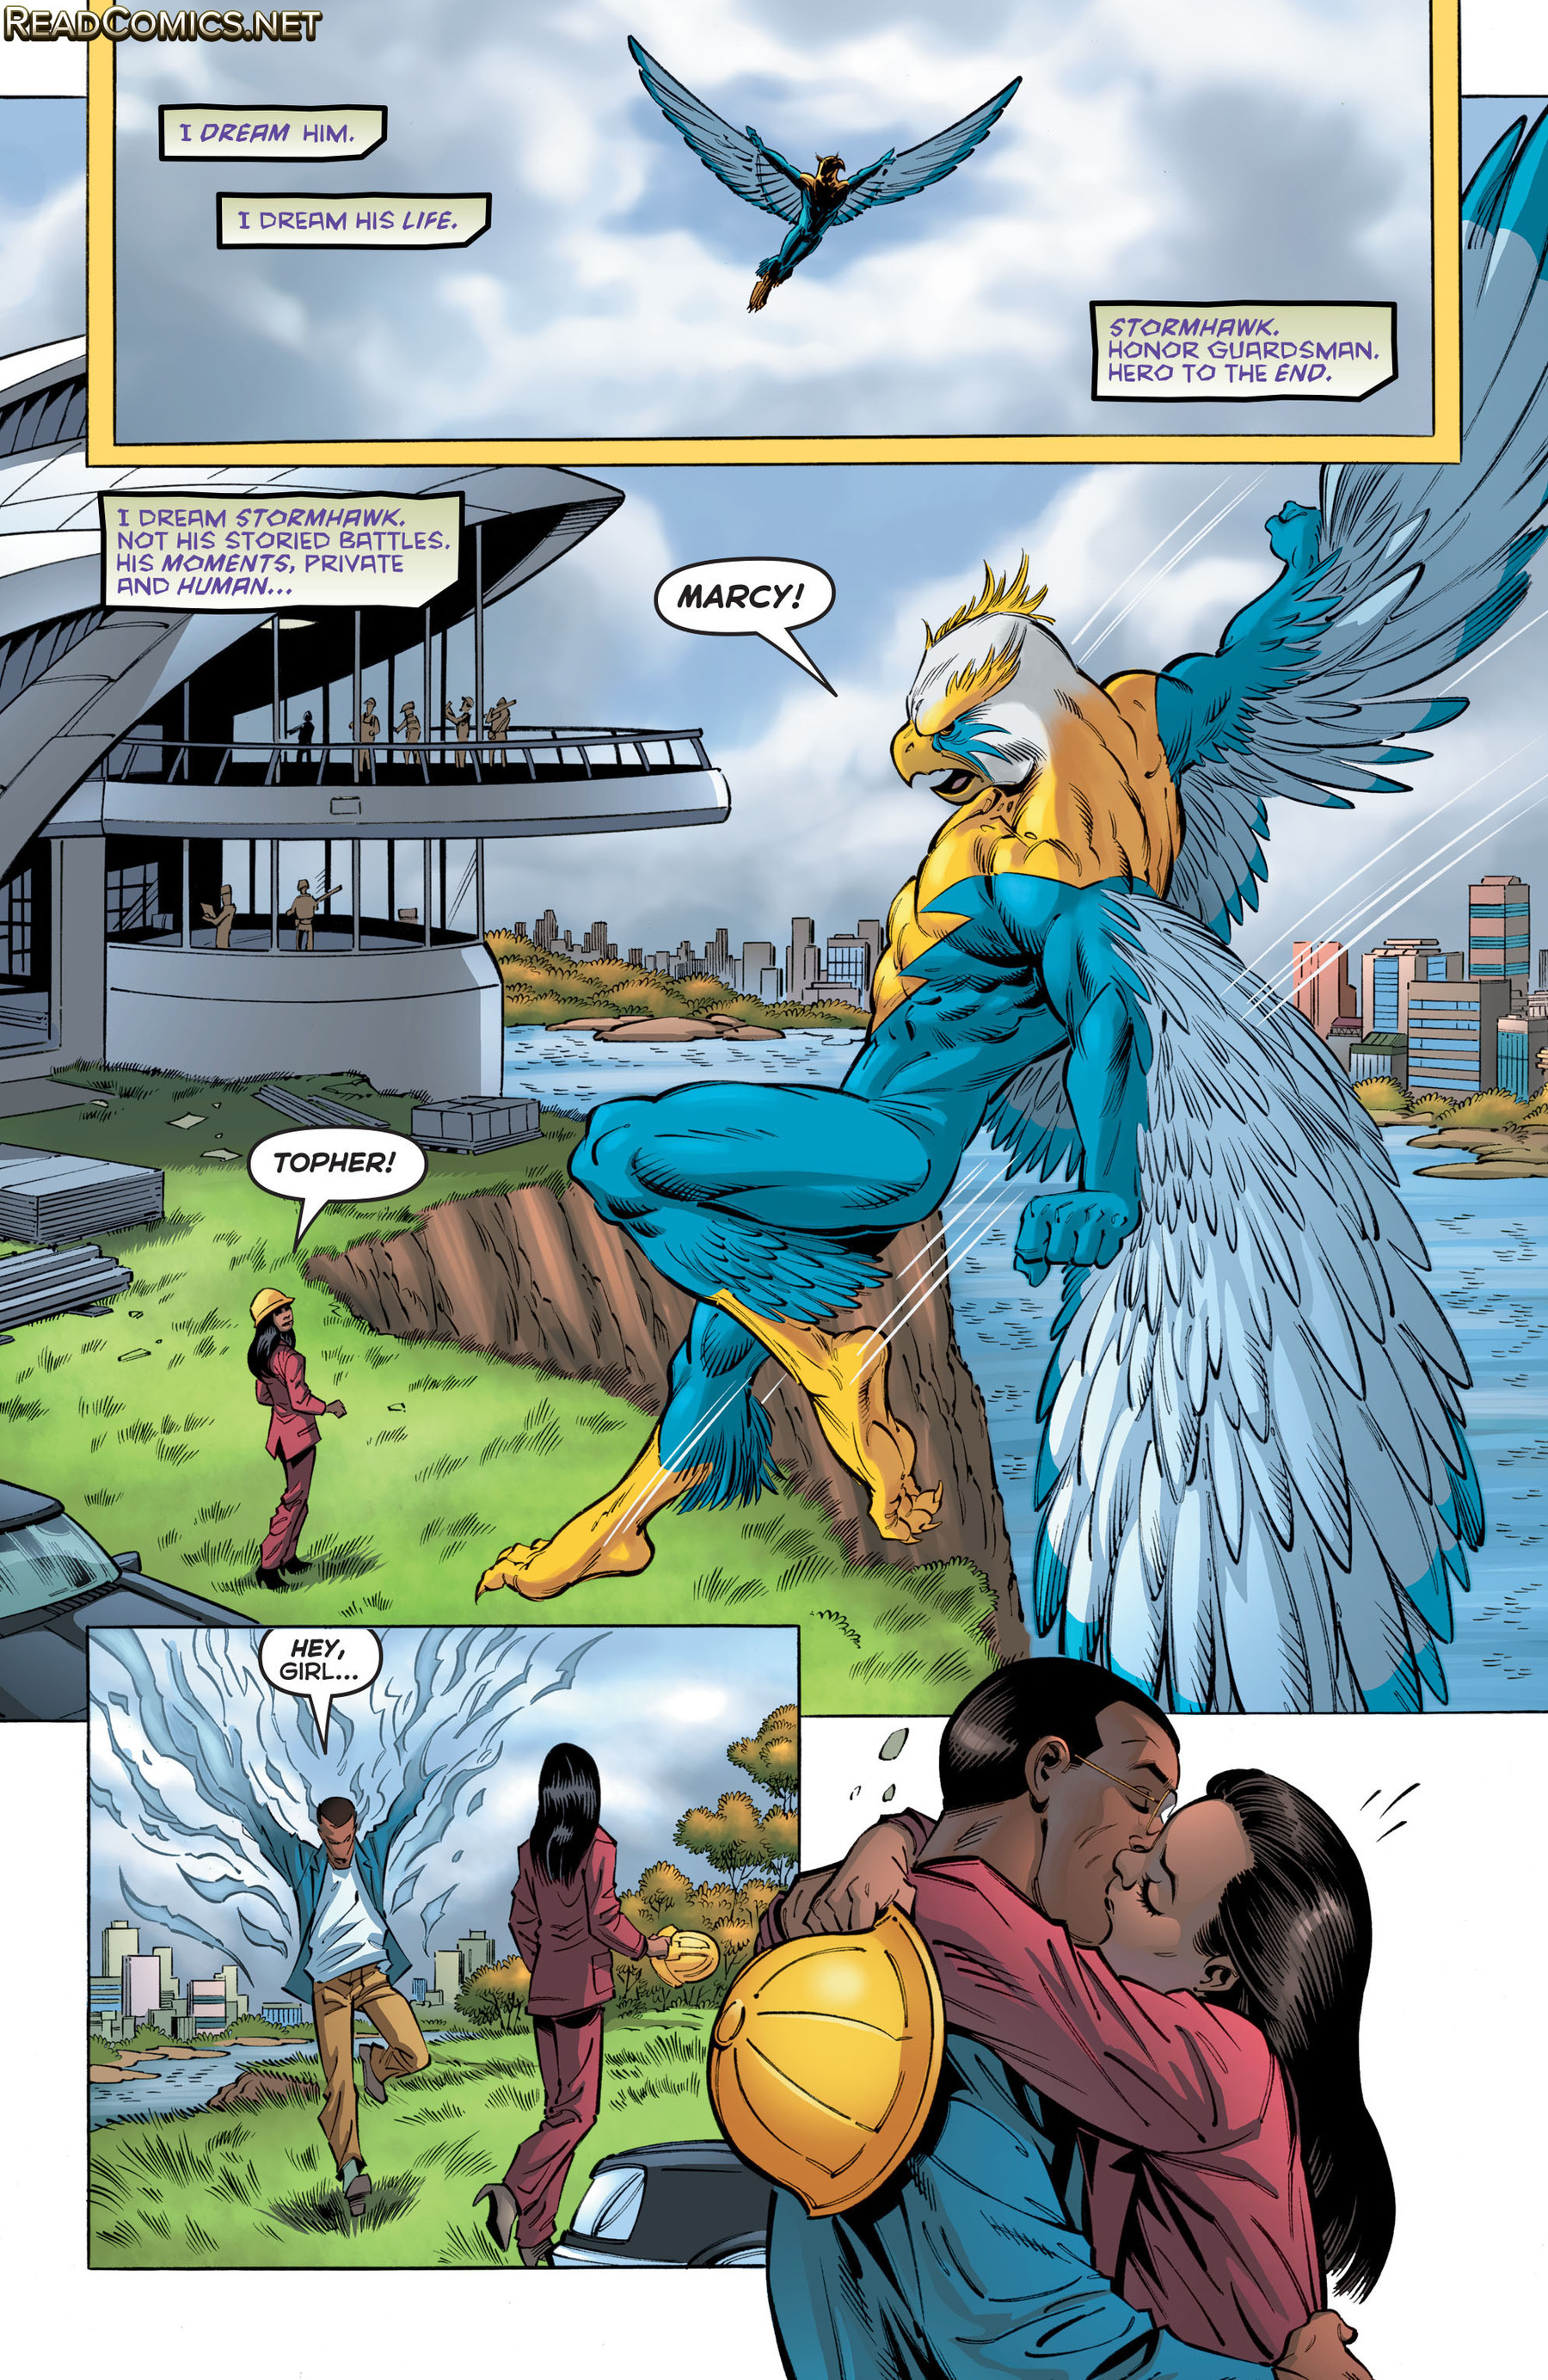 Astro City (2013-): Chapter 17 - Page 2